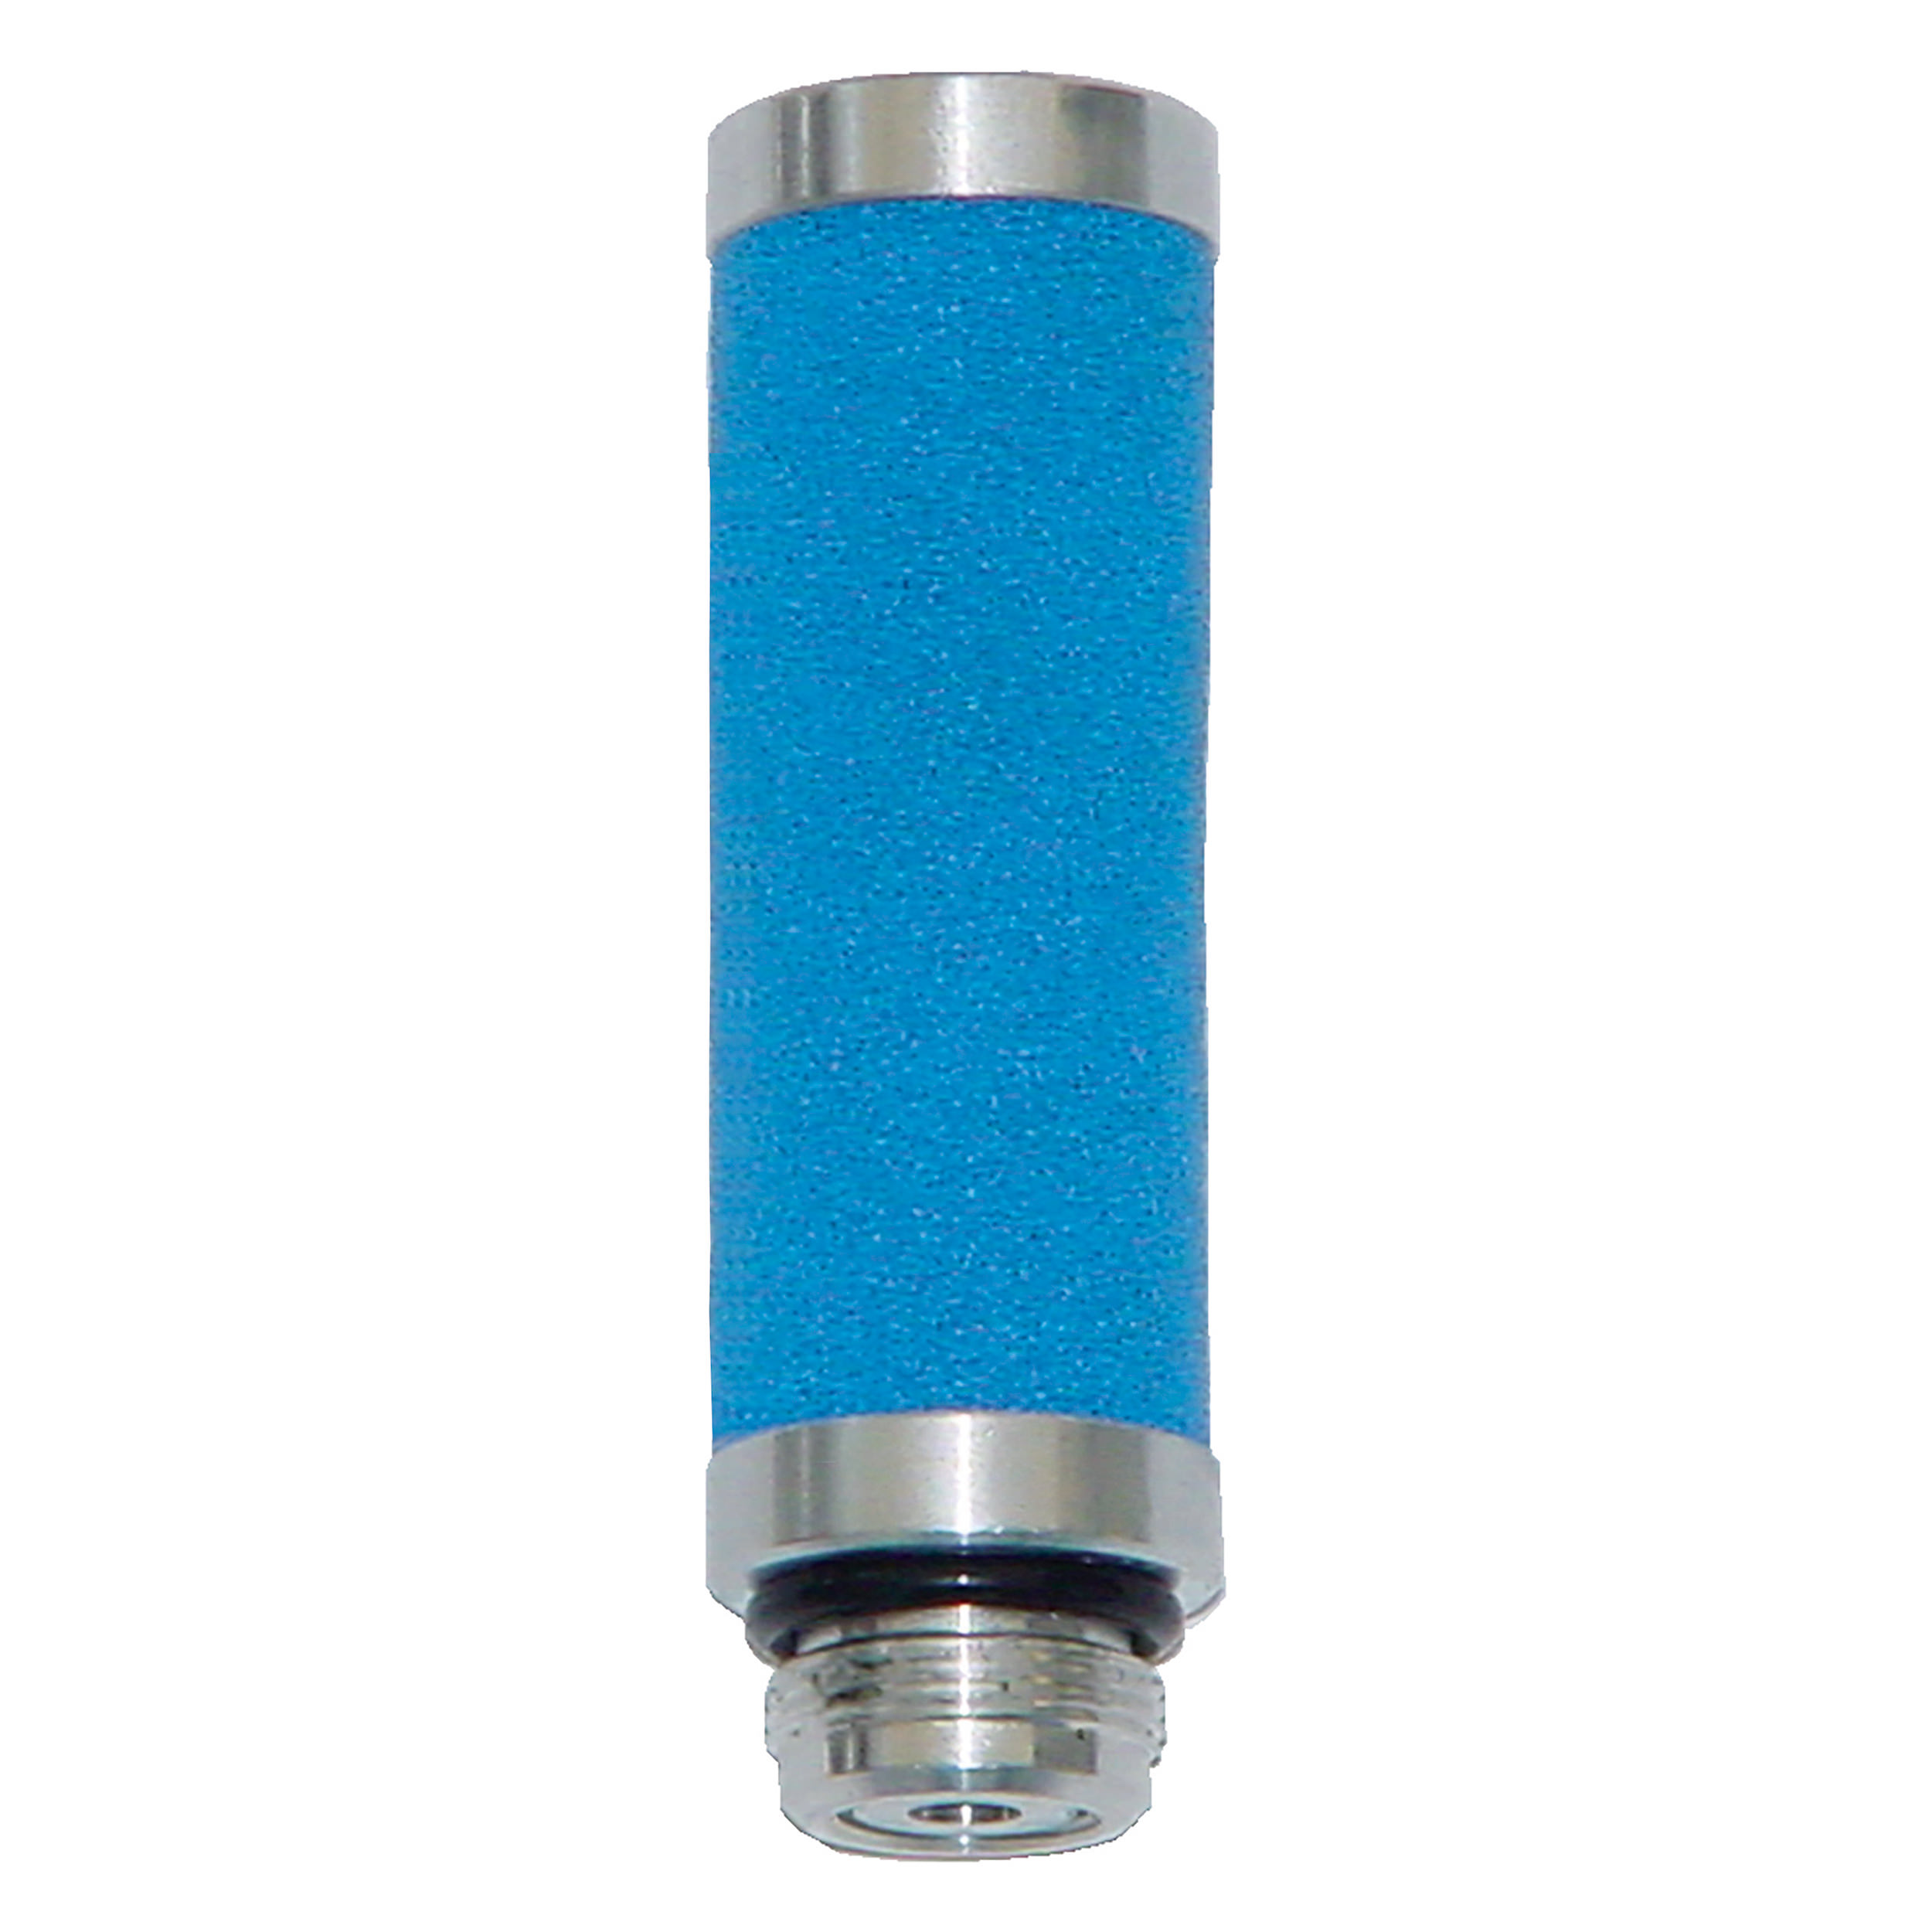 Microfilter insert variobloc, complete, with seal, suitable for: BG 20, BG 30